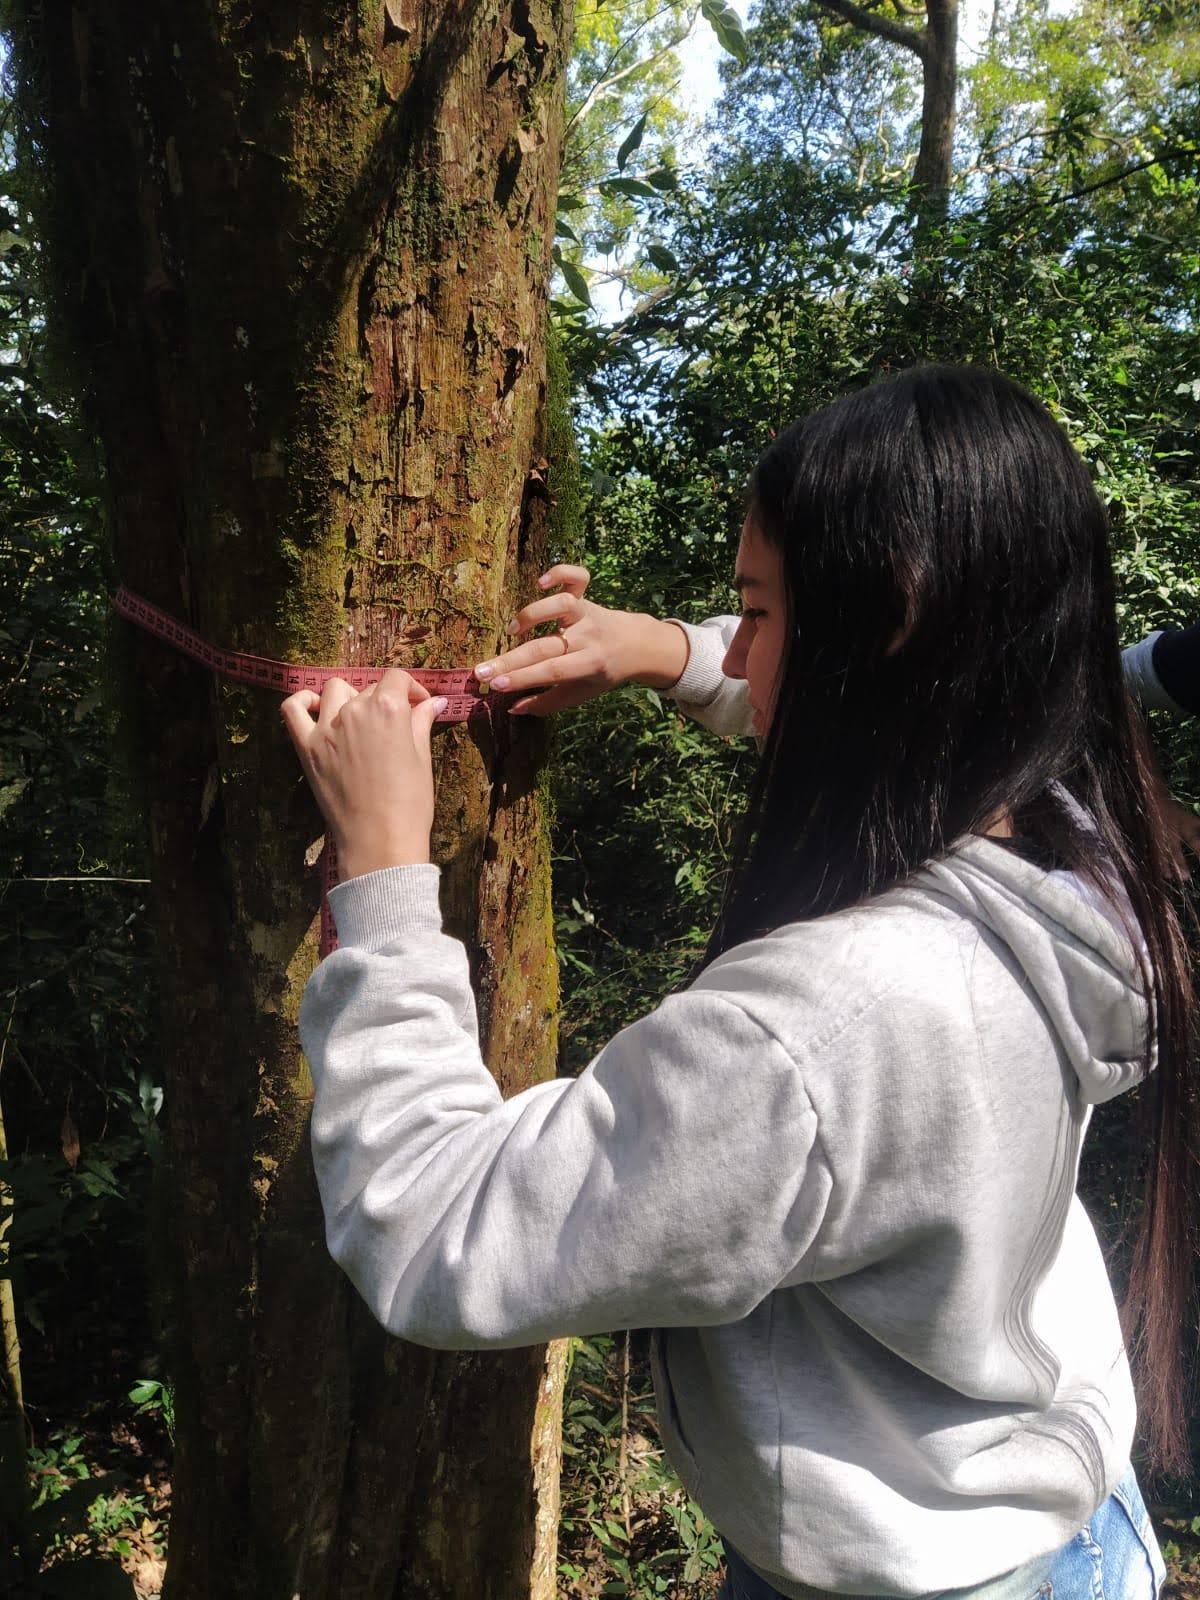 A student measures the circumference of a tree trunk.